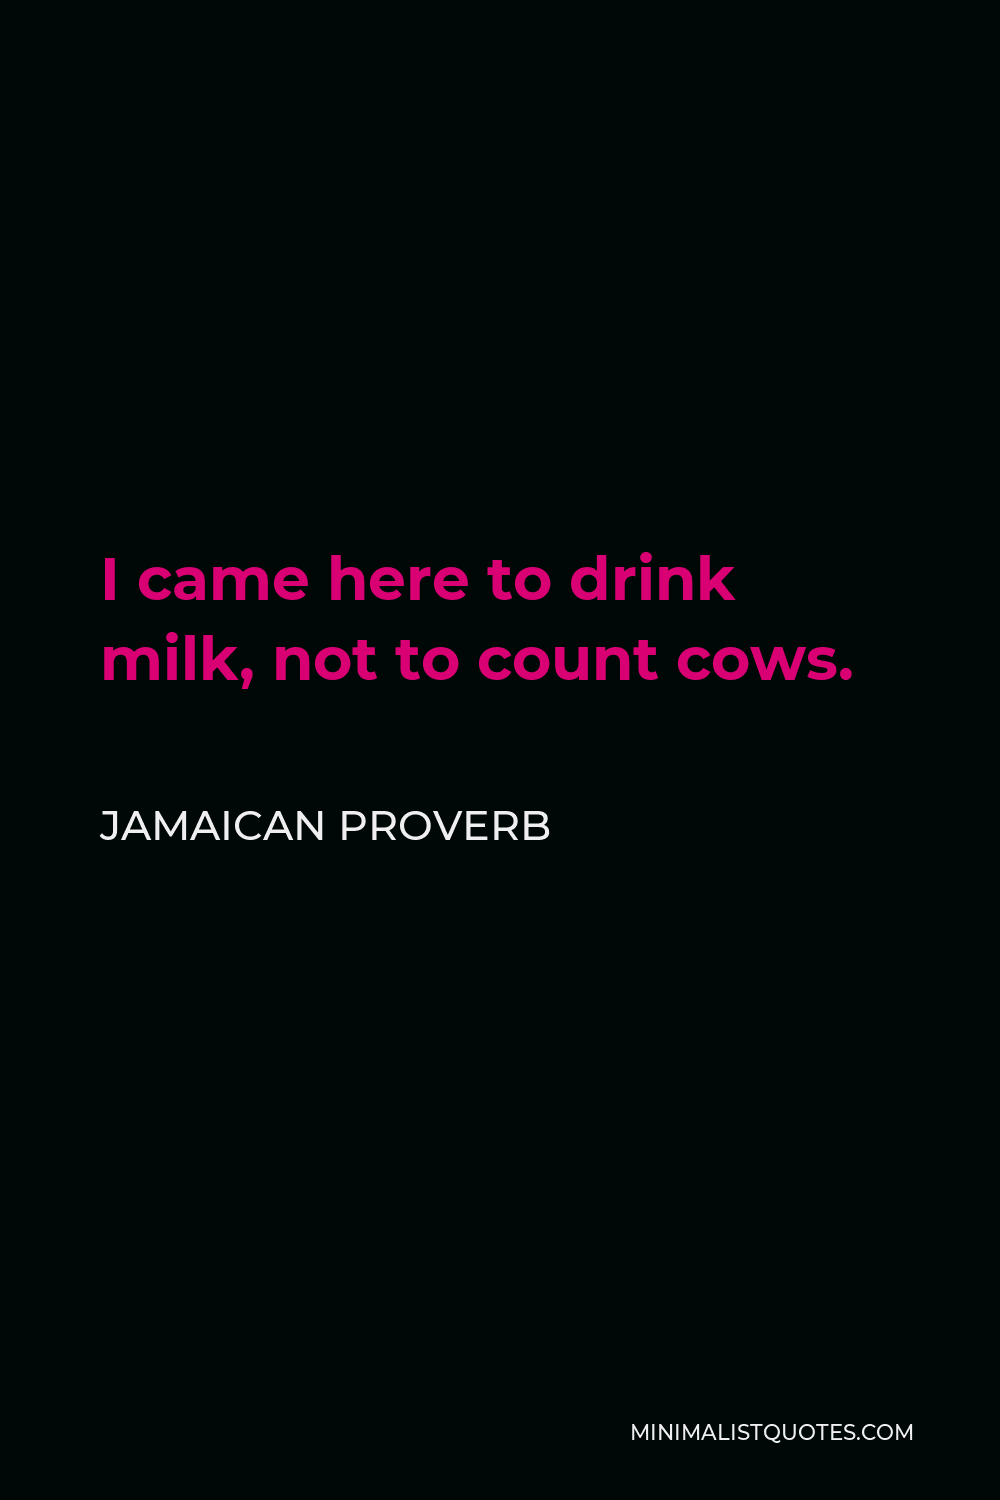 Jamaican Proverb Quote - I came here to drink milk, not to count cows.